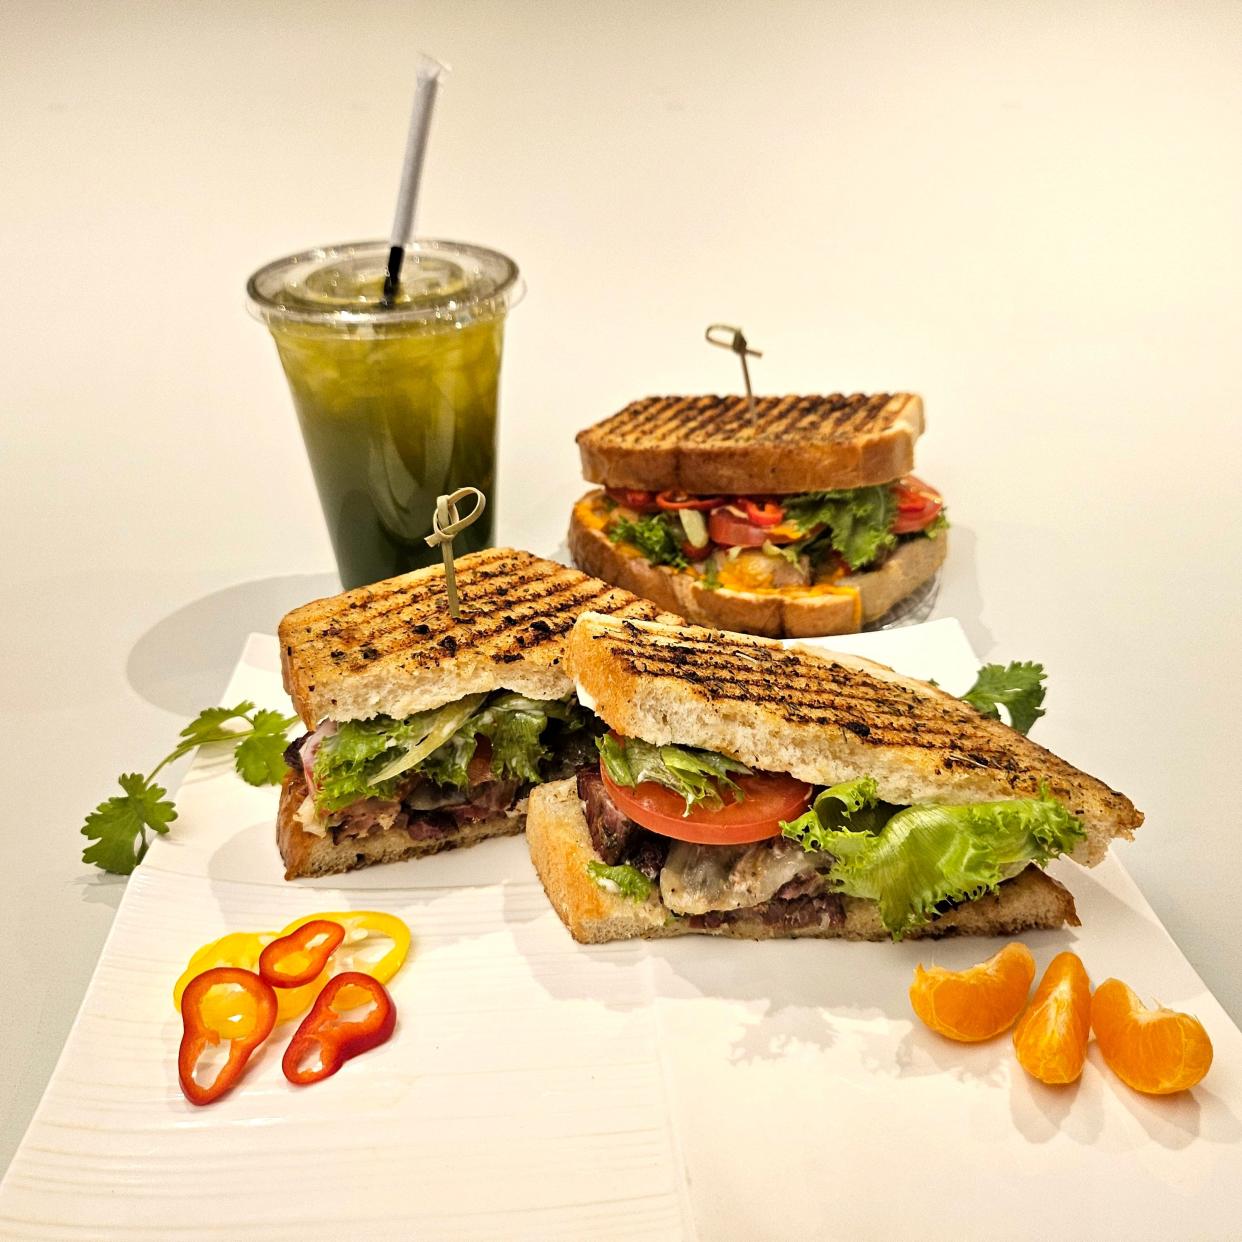 Cafe Rewind features a Baroness sandwich, front, spicy 3 Alarm Scorcher sandwich, back, and green apple and green tea drink.